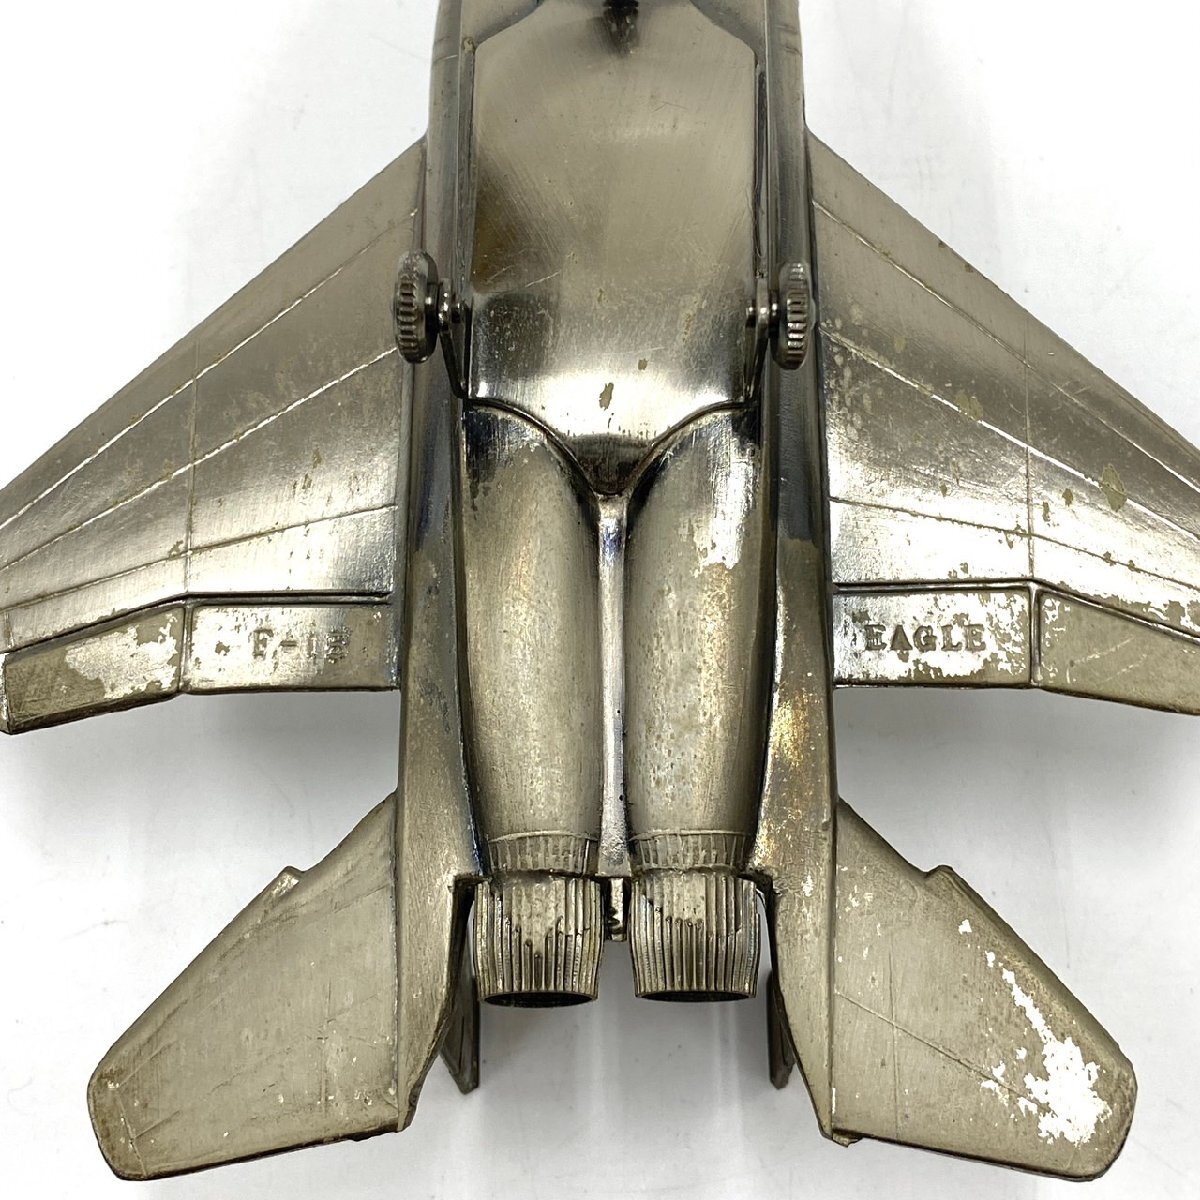 1 jpy start model lighter summarize 4 point set aircraft fighter (aircraft) Eagle F-15 74 type tank helicopter VERTOL made of metal figure collection 